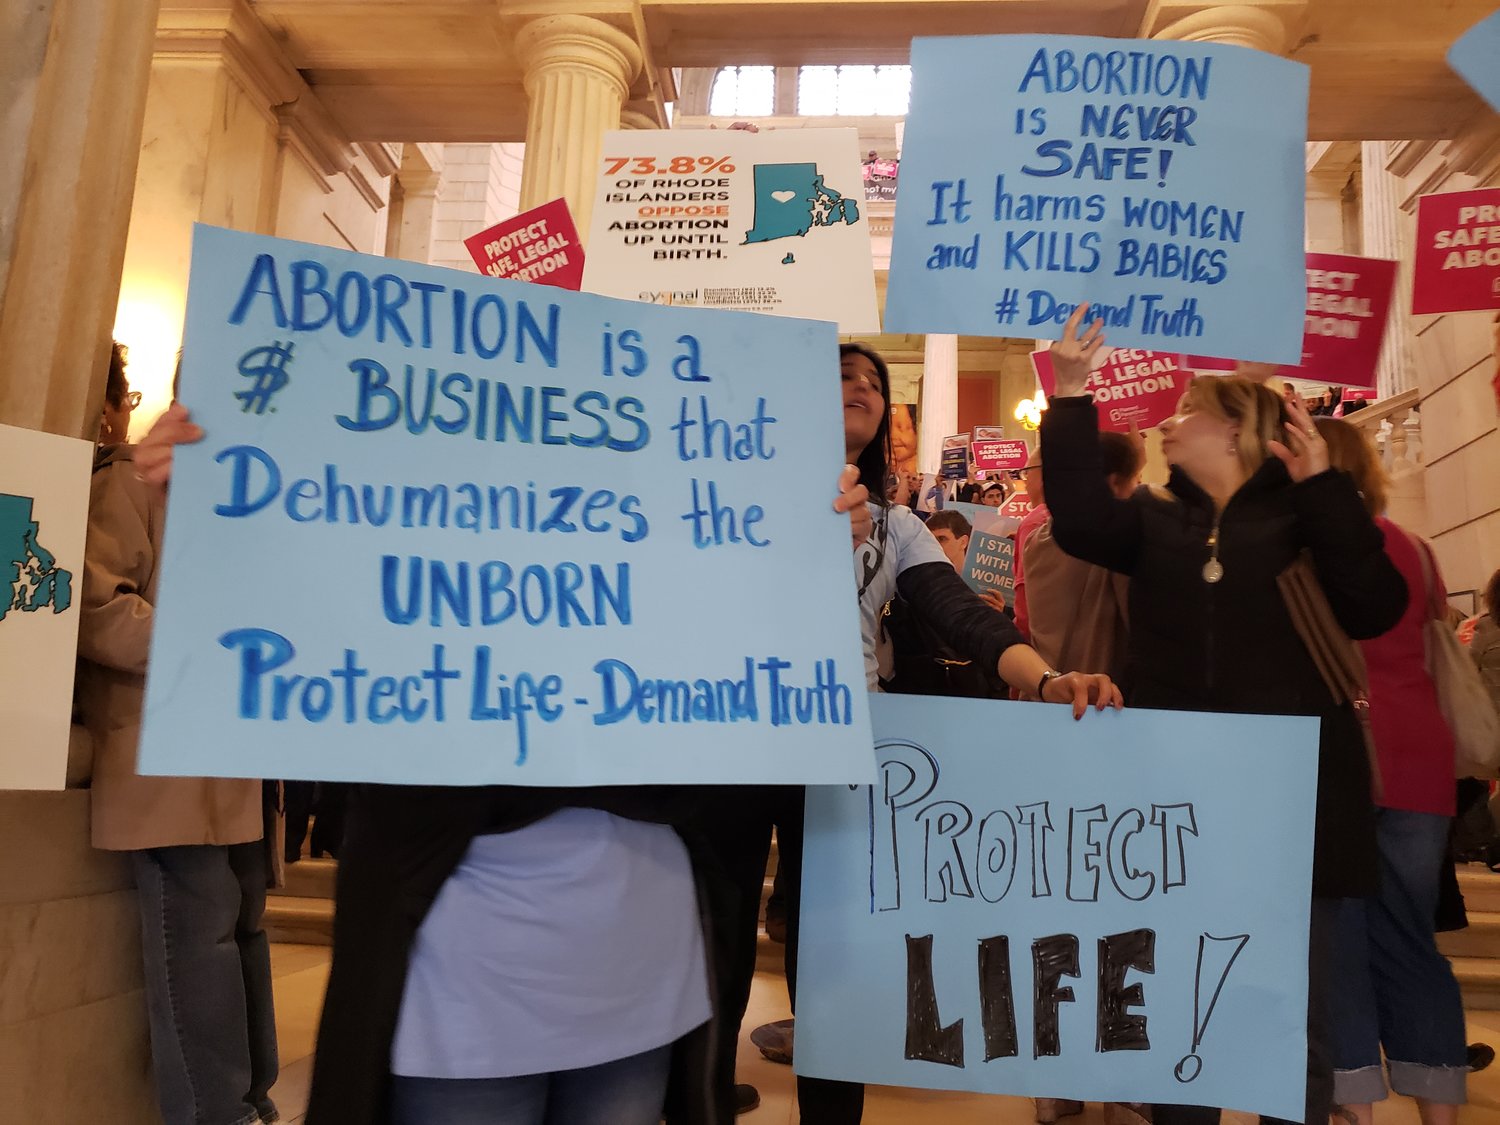 Pro-life activists hold signs in opposition to a Senate bill that would have expanded legal abortion in Rhode Island.